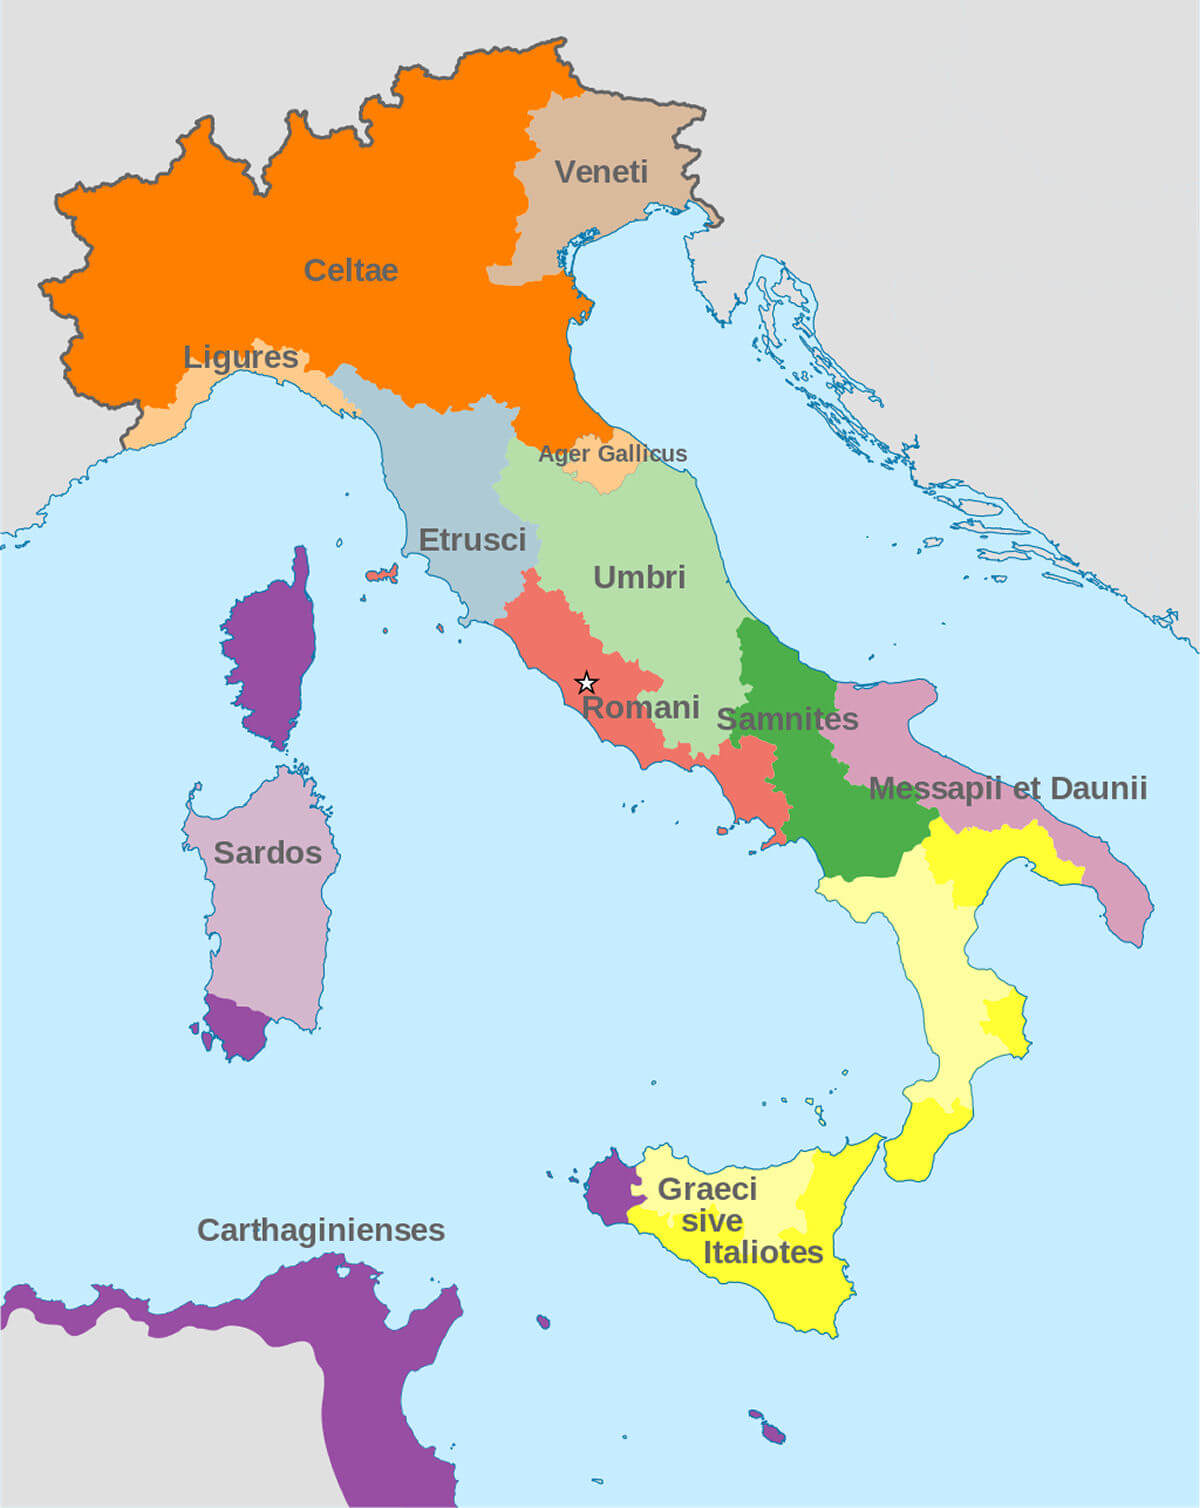 A map of Italy in 4th century BC, showing various tribe confederations/alliances/groups in the wake of the Latin War